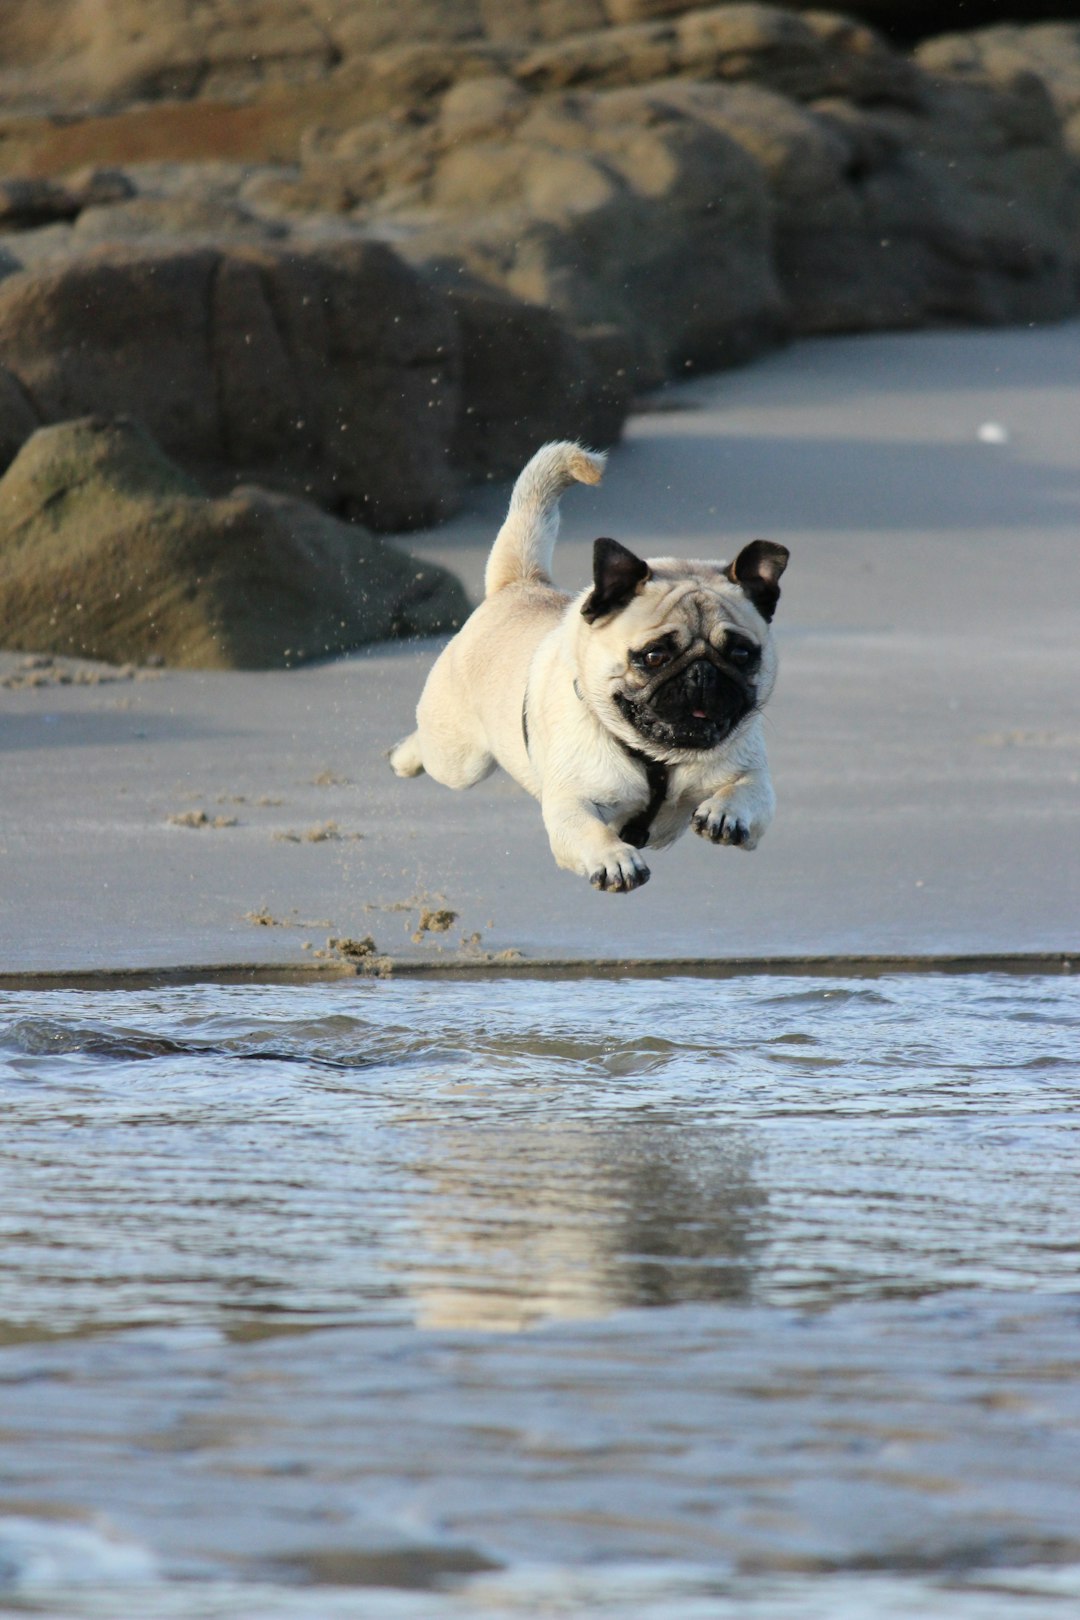 A pug jumping into the water. 